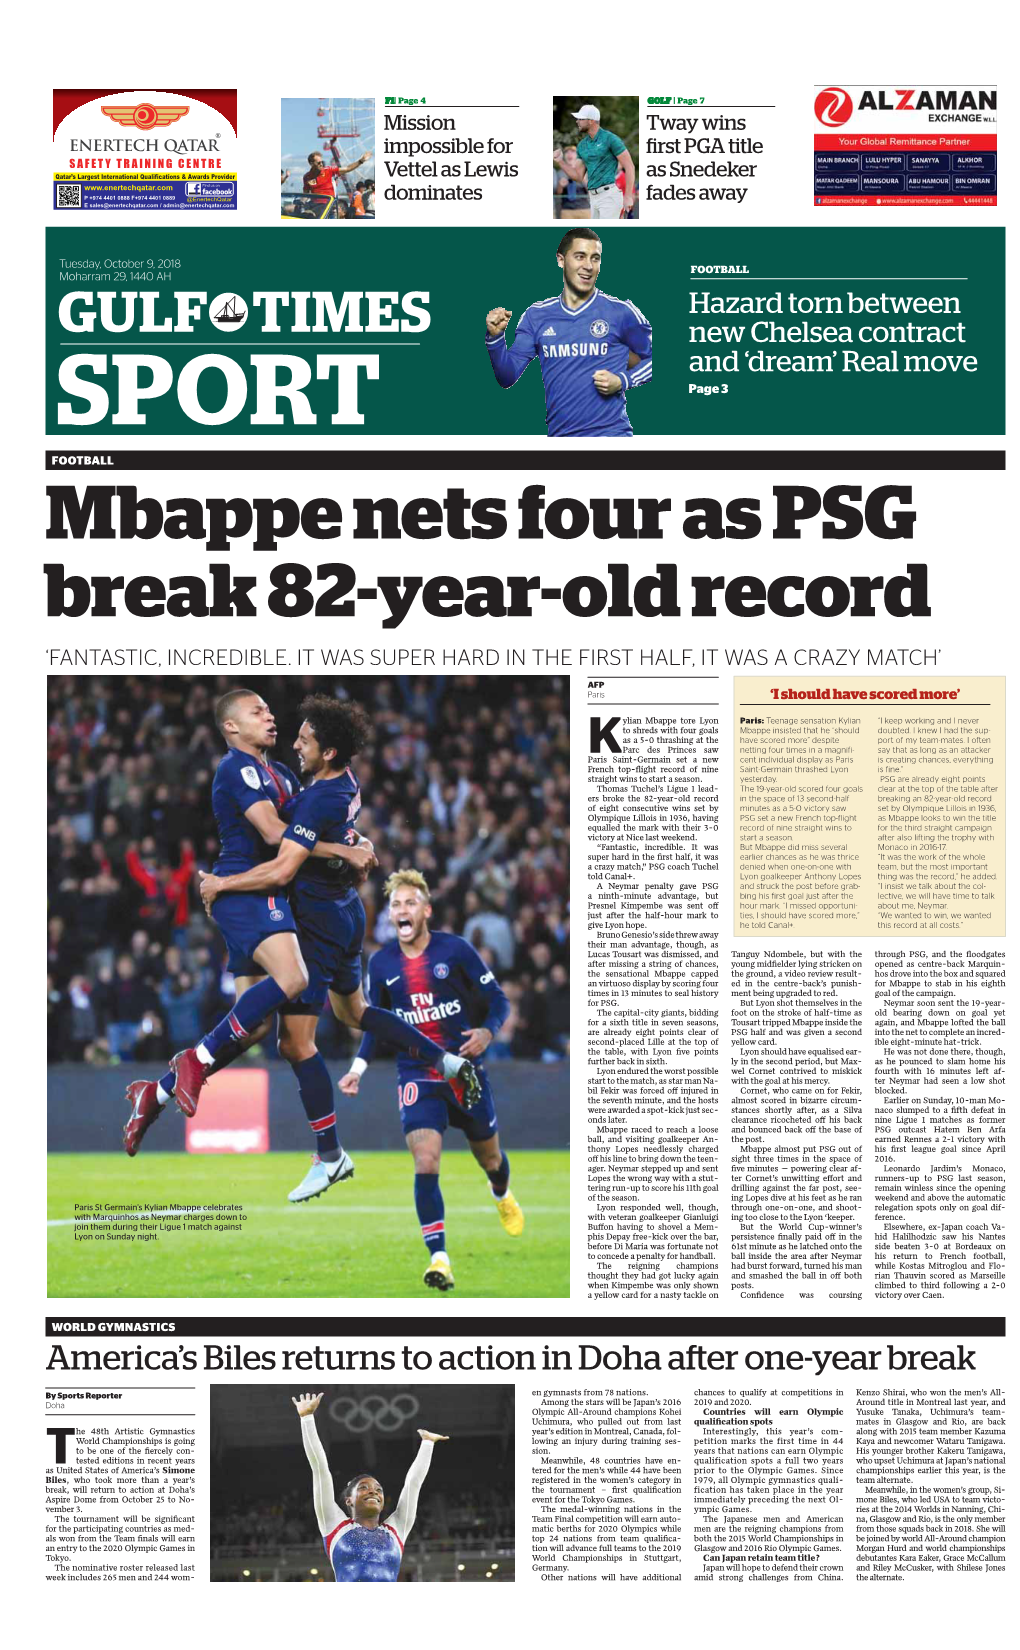 GULF TIMES New Chelsea Contract and ‘Dream’ Real Move SPORT Page 3 FOOTBALL Mbappe Nets Four As PSG Break 82-Year-Old Record ‘FANTASTIC, INCREDIBLE